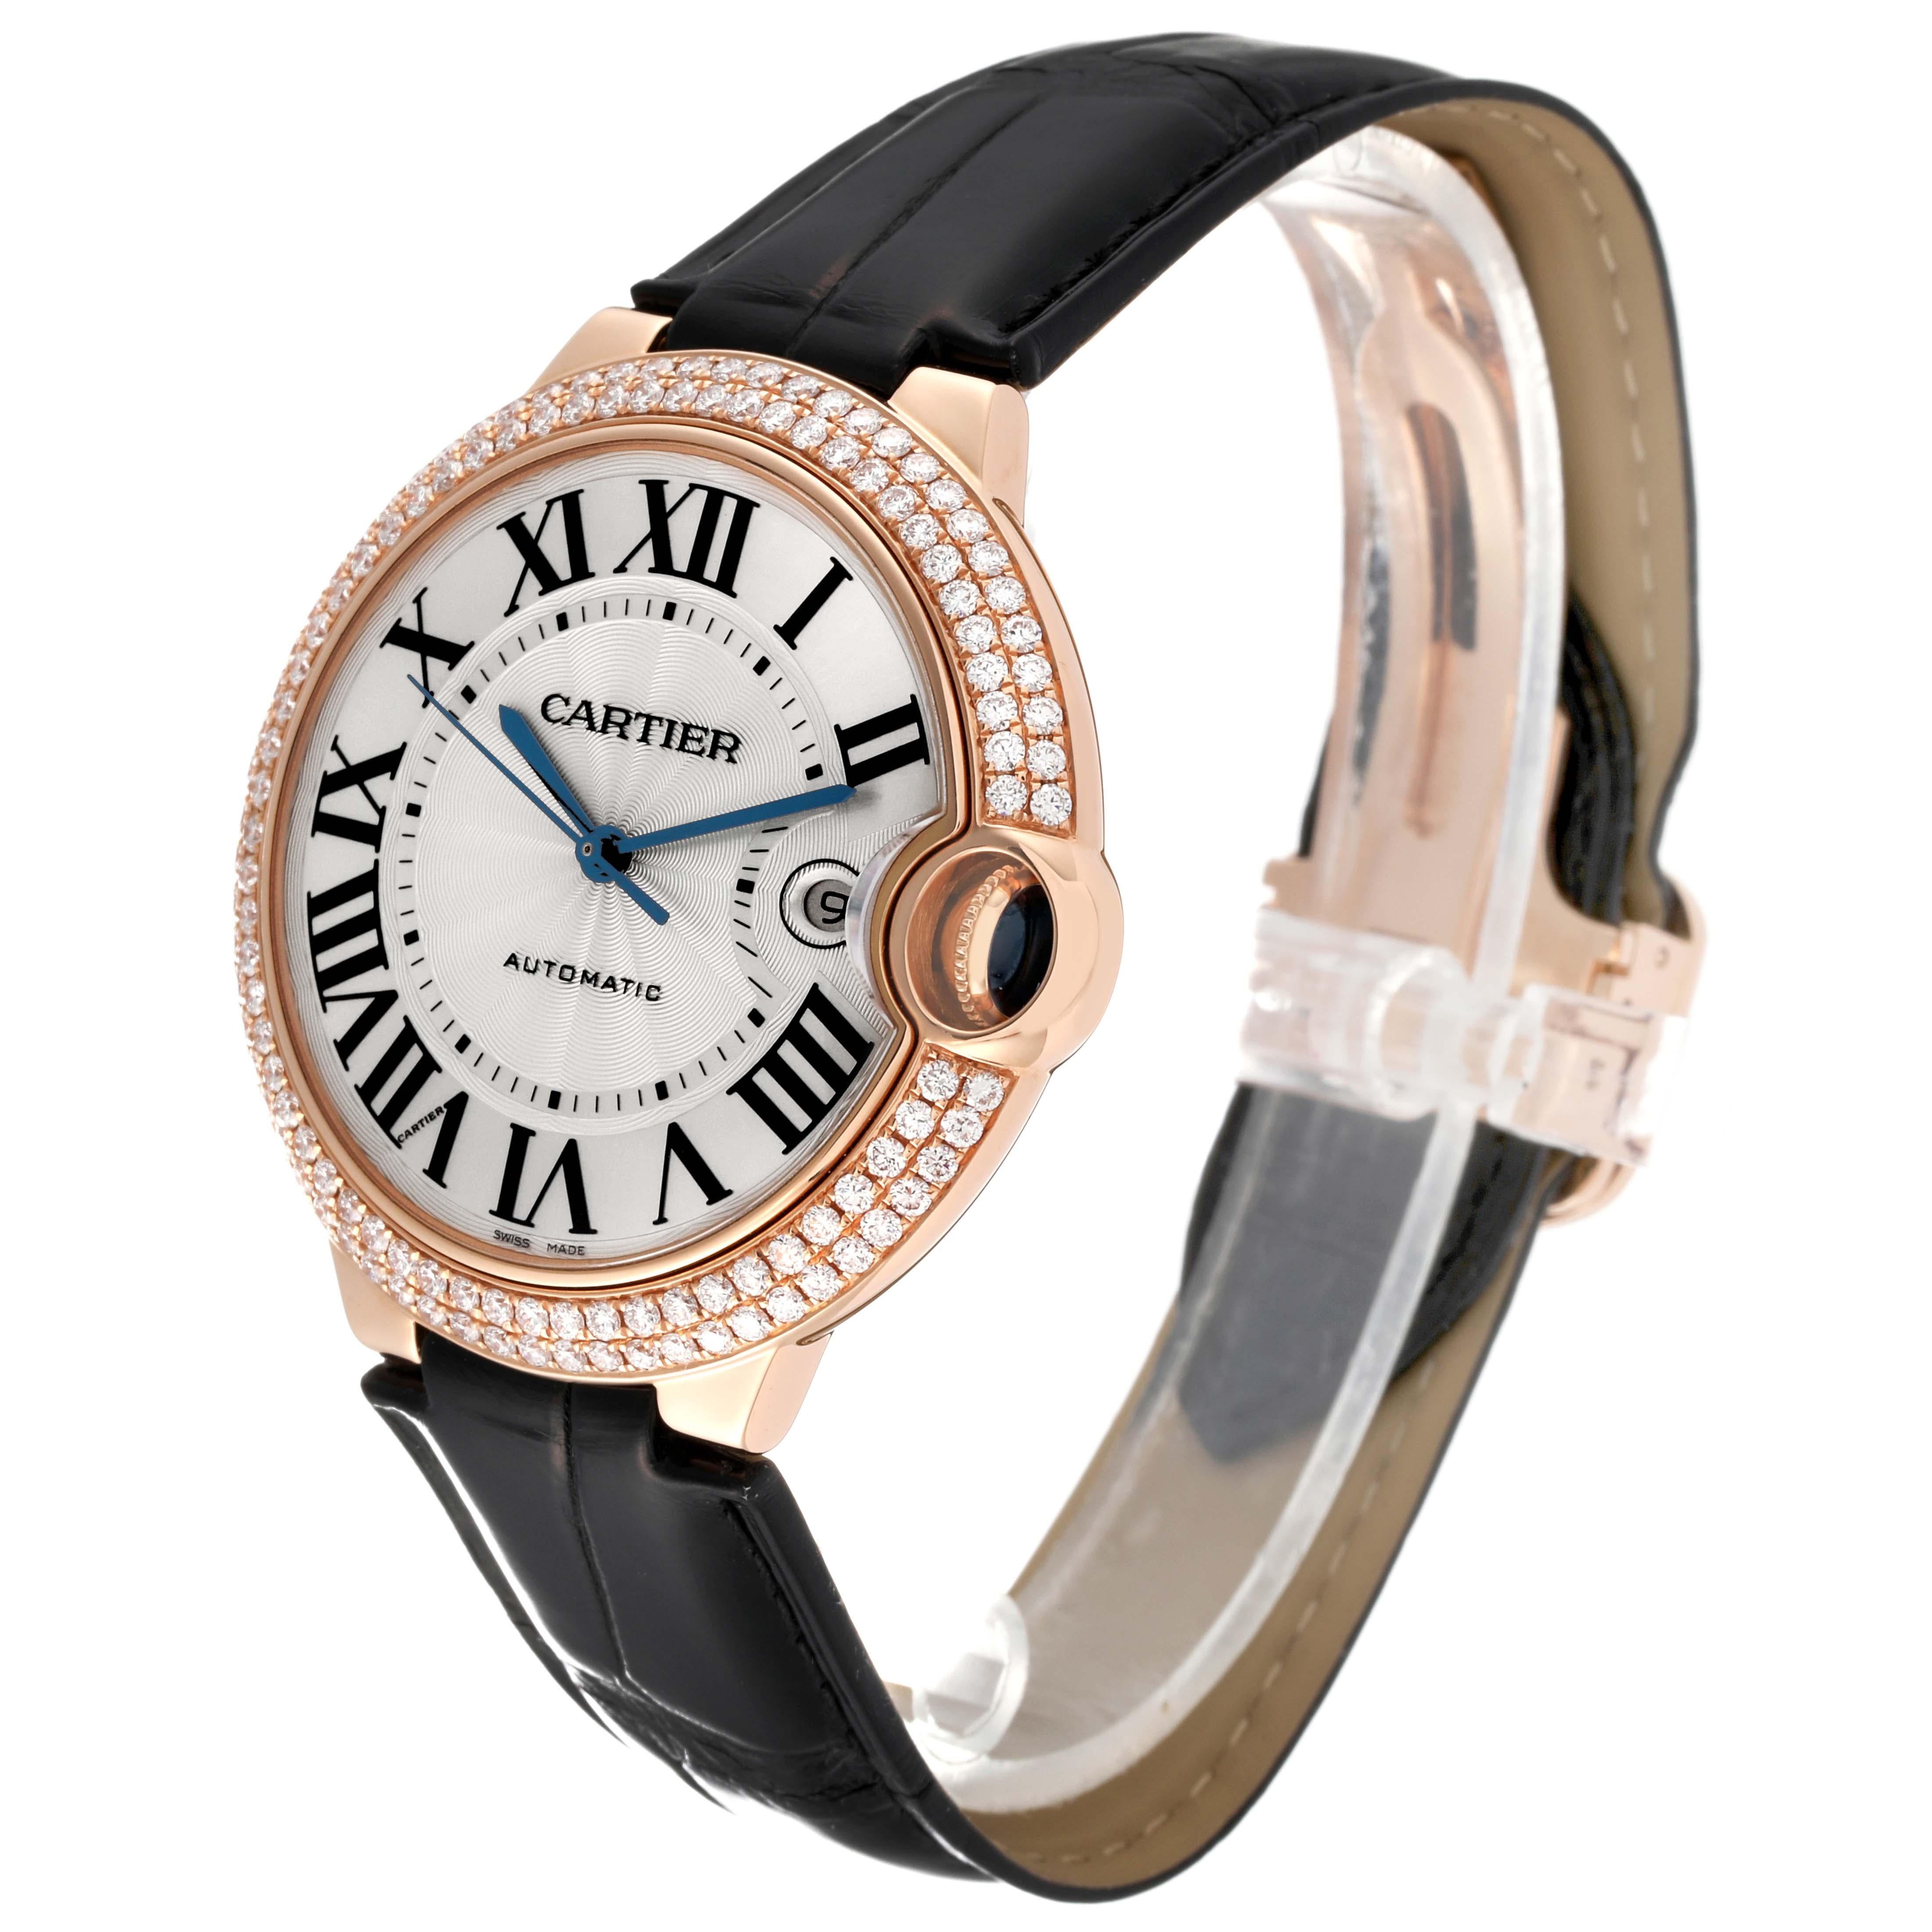 Cartier Ballon Bleu 42mm Rose Gold Diamond Mens Watch WE900851 Box Card. Automatic self-winding movement. 18K rose gold case 42 mm in diameter. Fluted crown set with the blue sapphire cabochon. 18K rose gold original Cartier factory two row diamond